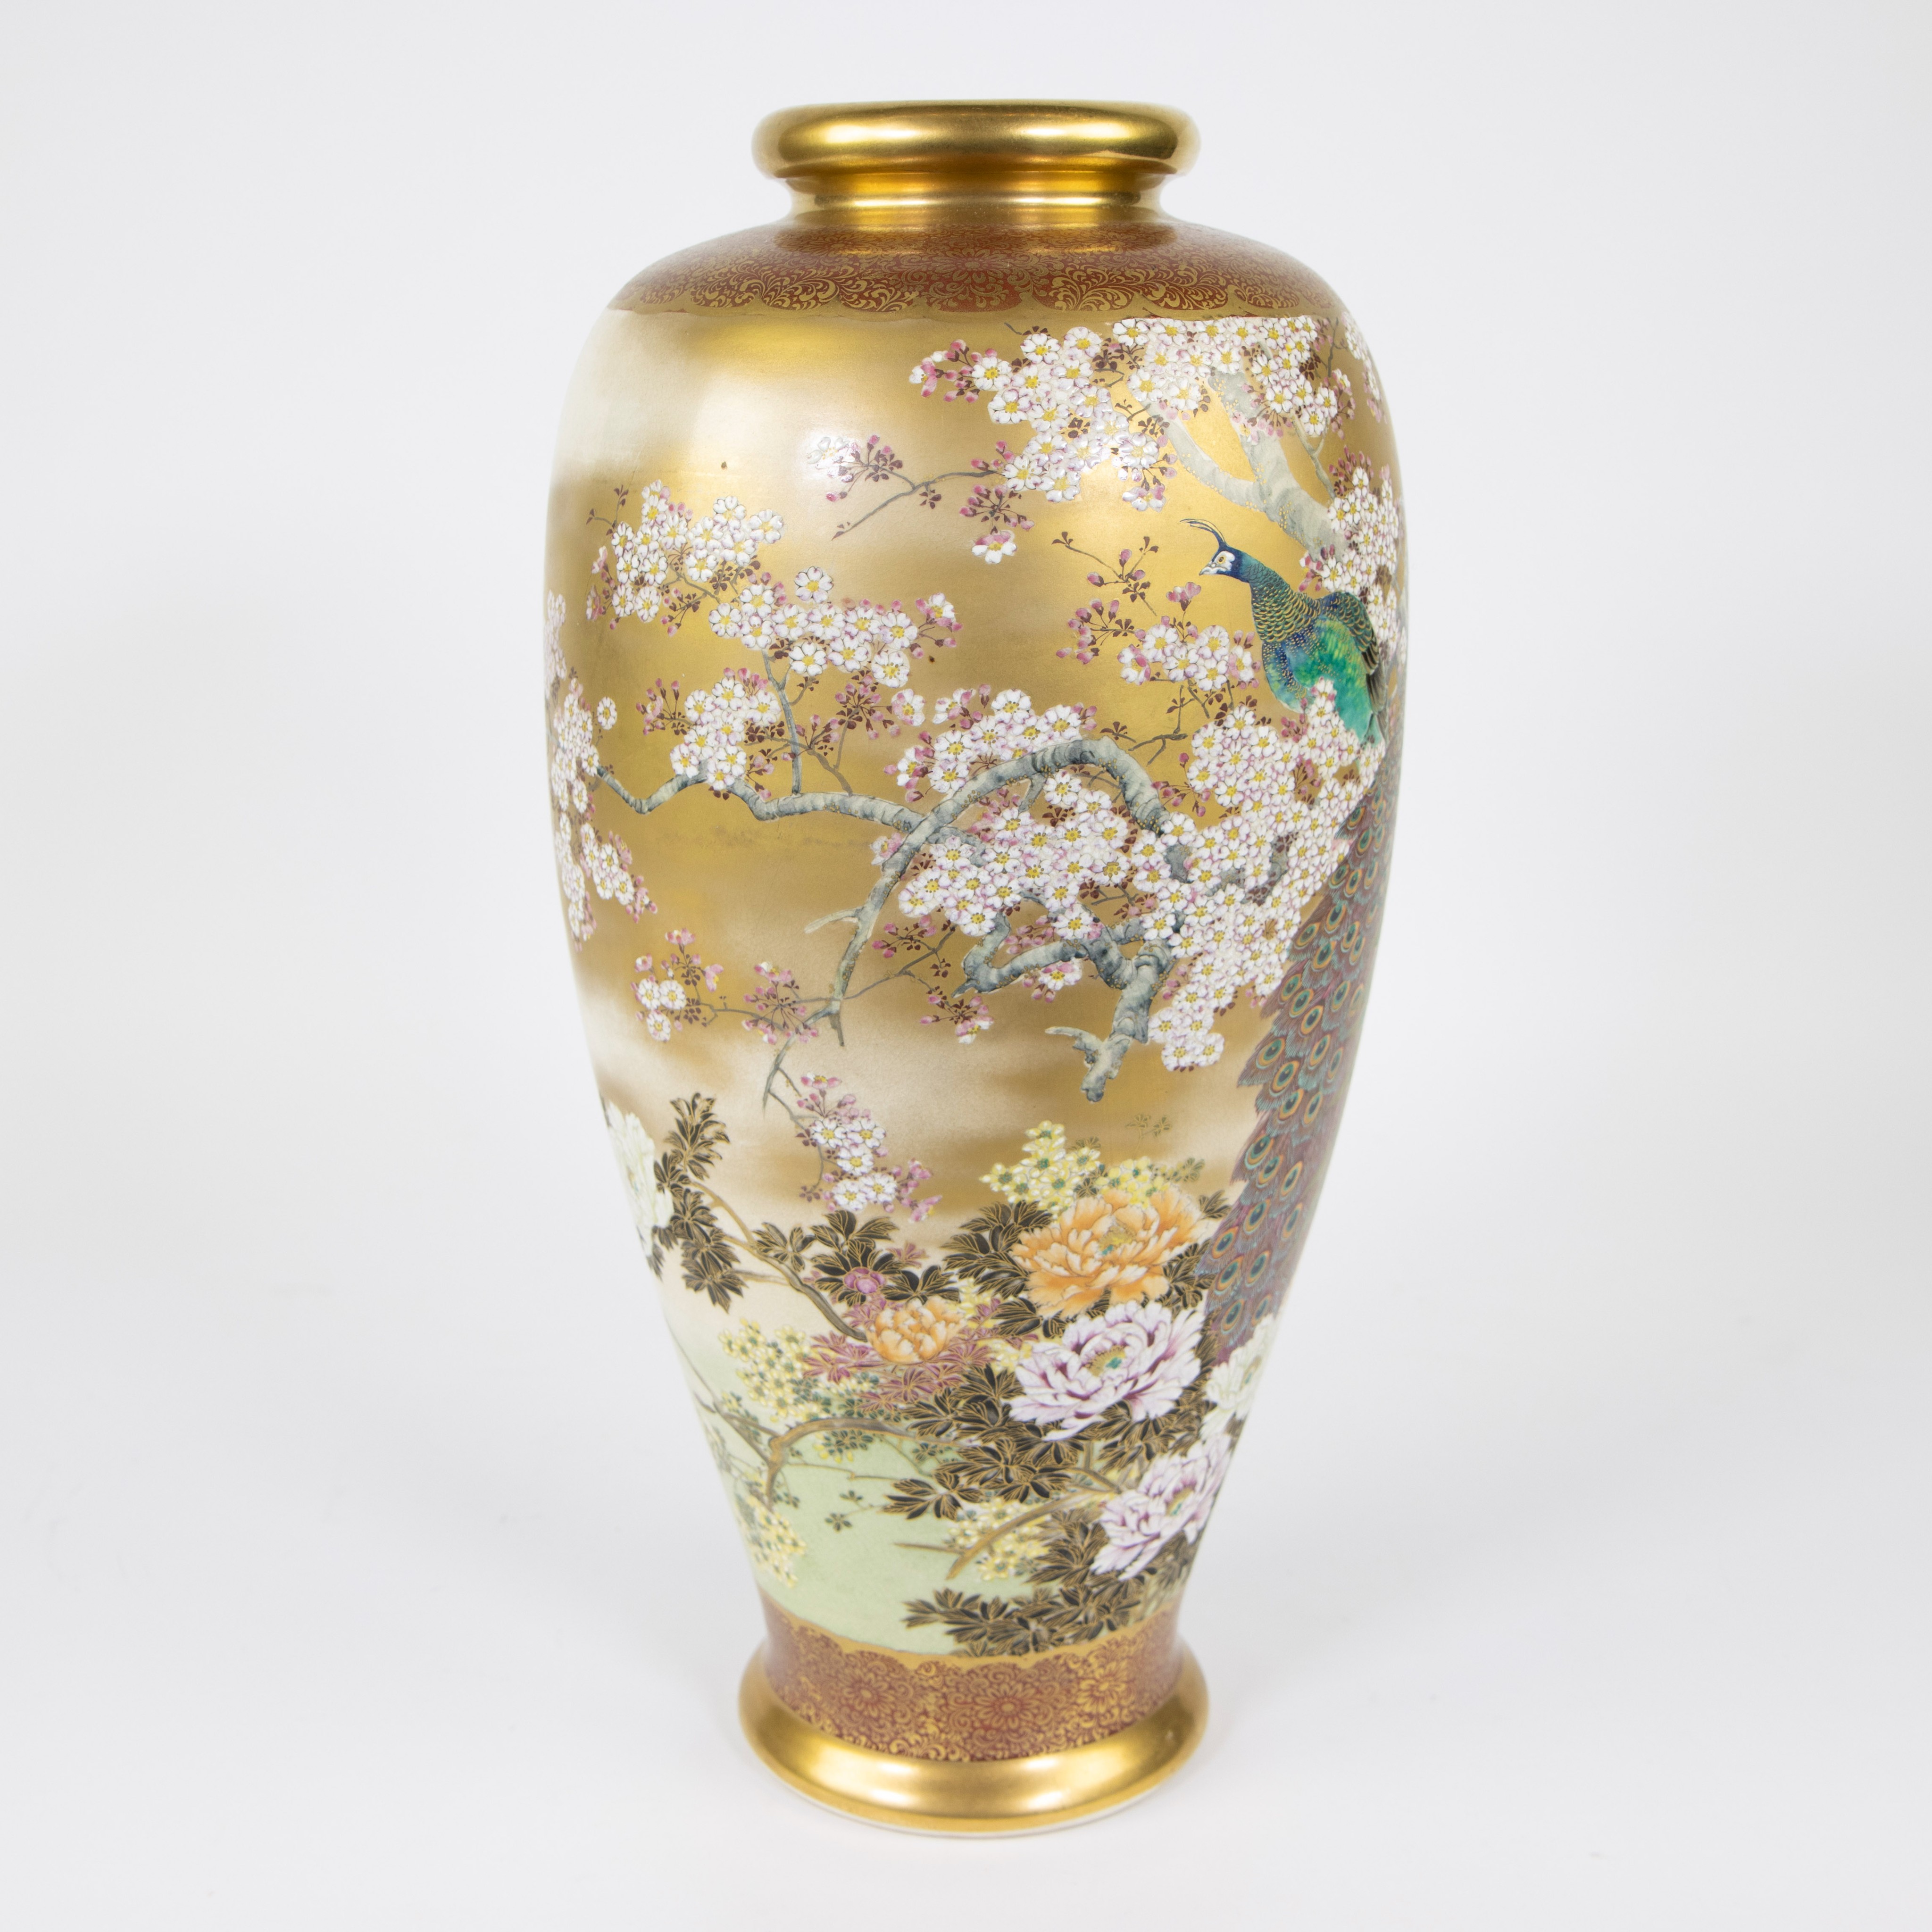 Porcelain vase, fine, hand-painted decor of peacocks and flowers on a gold background, signed - Image 4 of 5